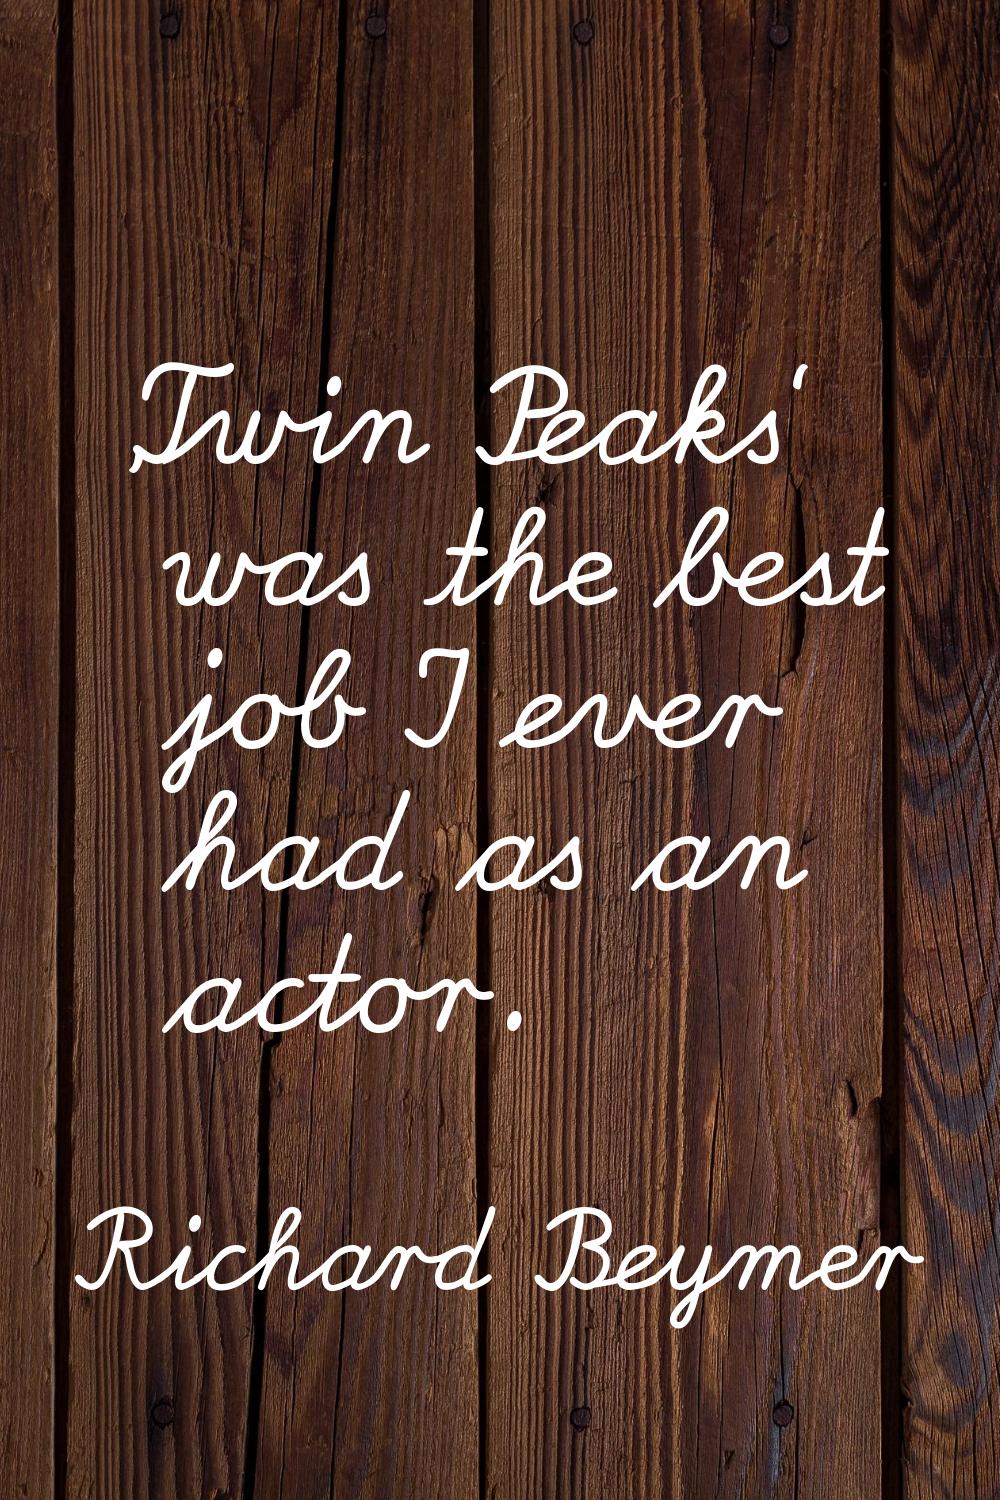 'Twin Peaks' was the best job I ever had as an actor.